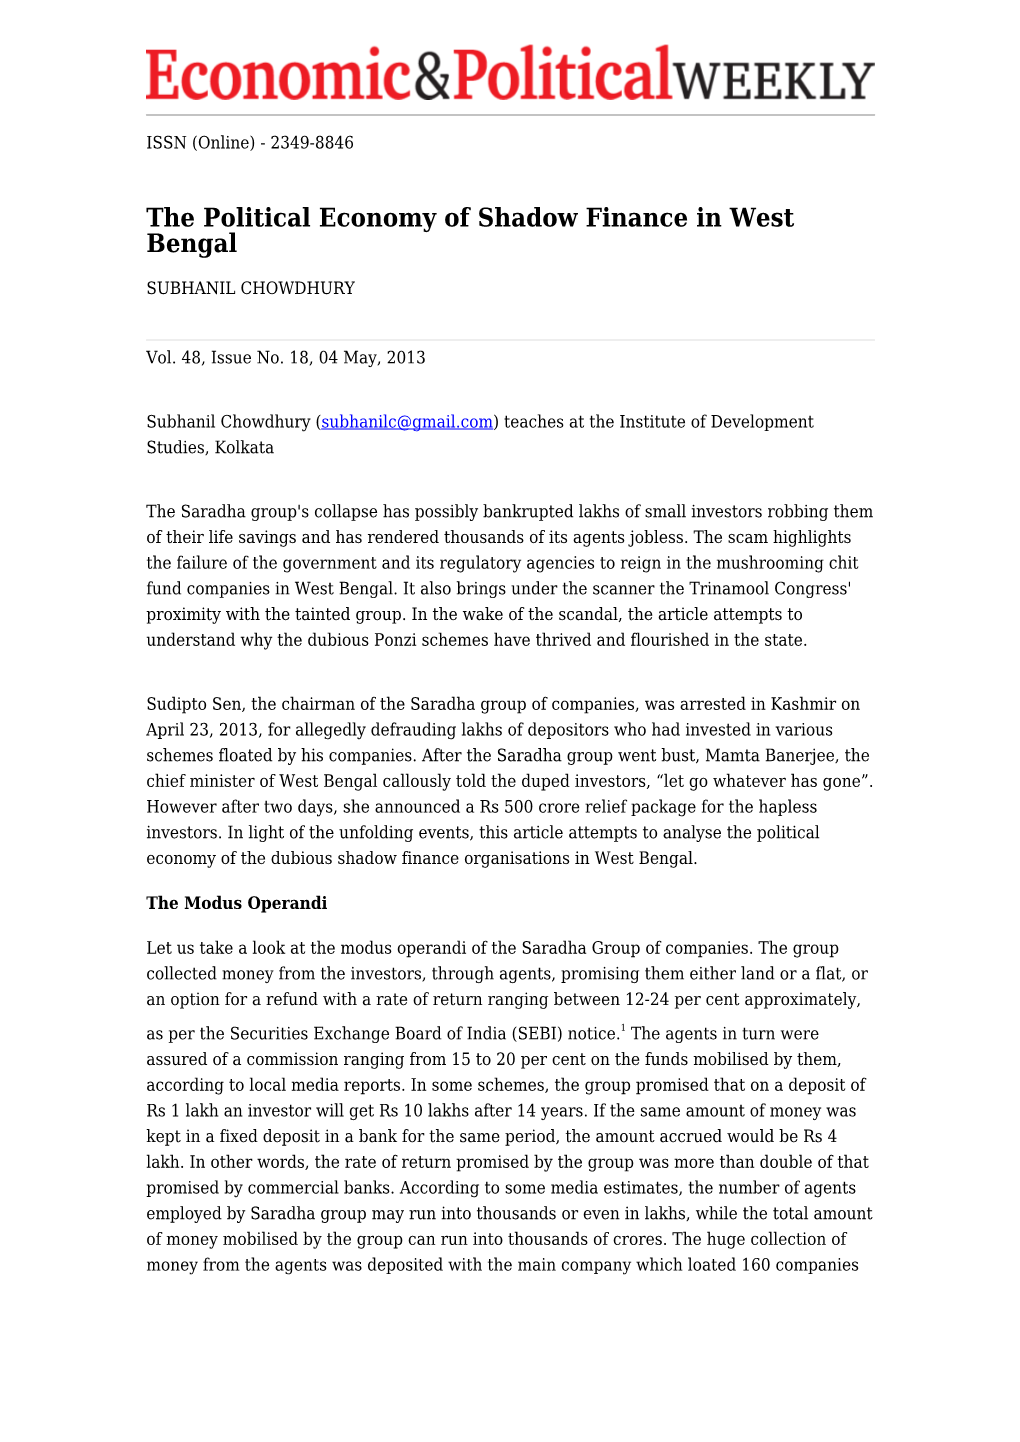 The Political Economy of Shadow Finance in West Bengal